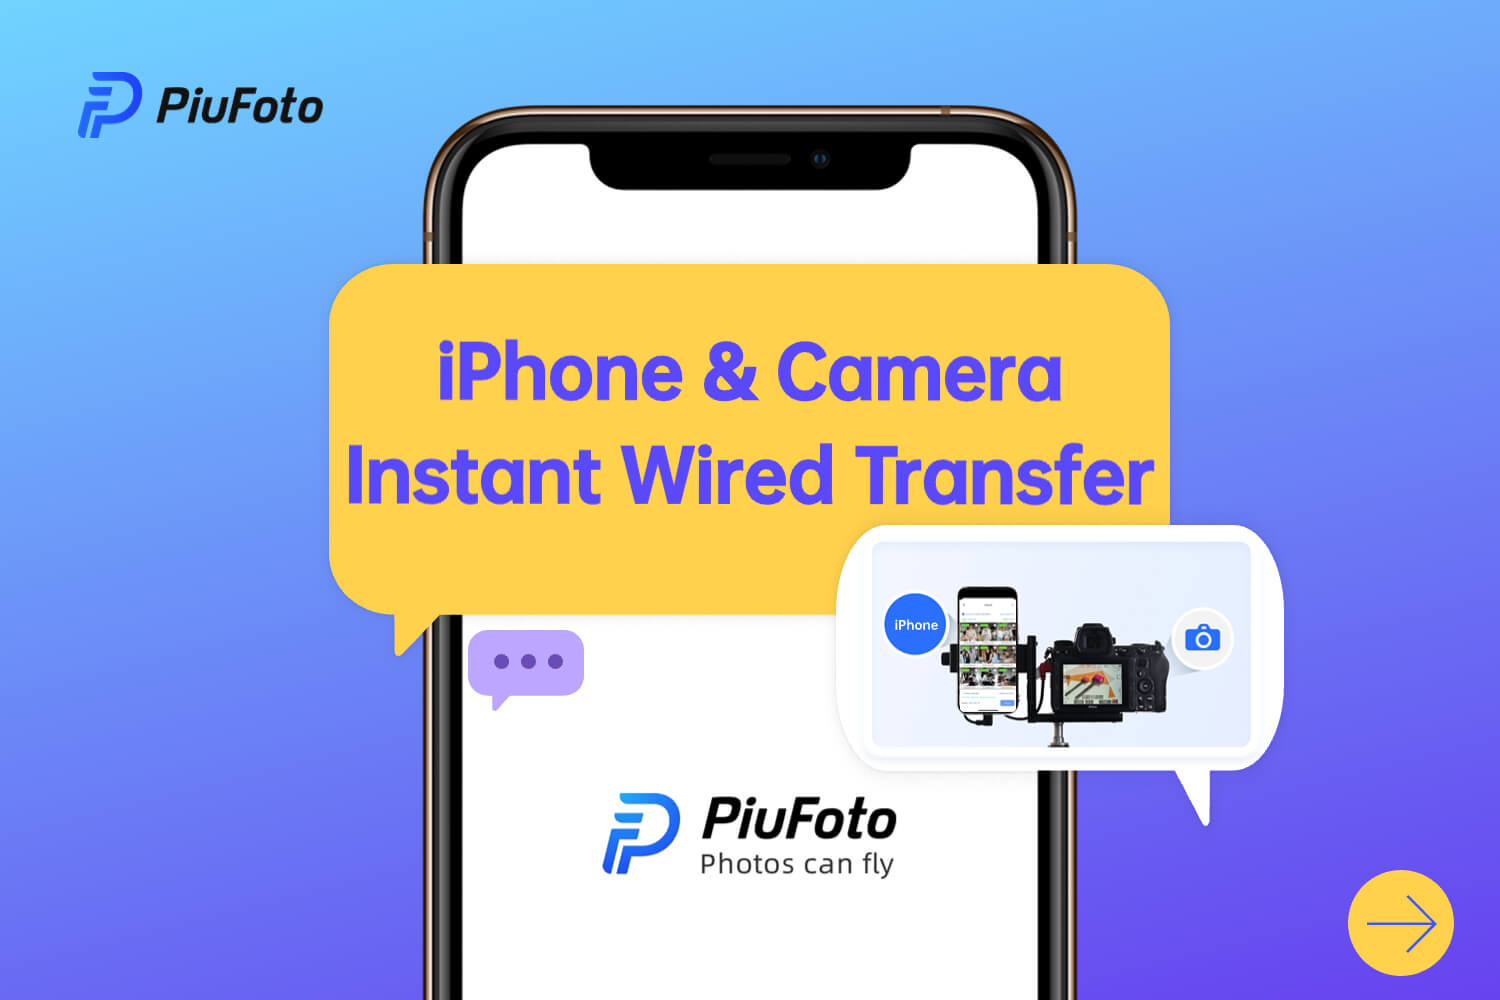 Piufoto Vital Feature Updates: iPhone & Camera Instant Wired Transfer